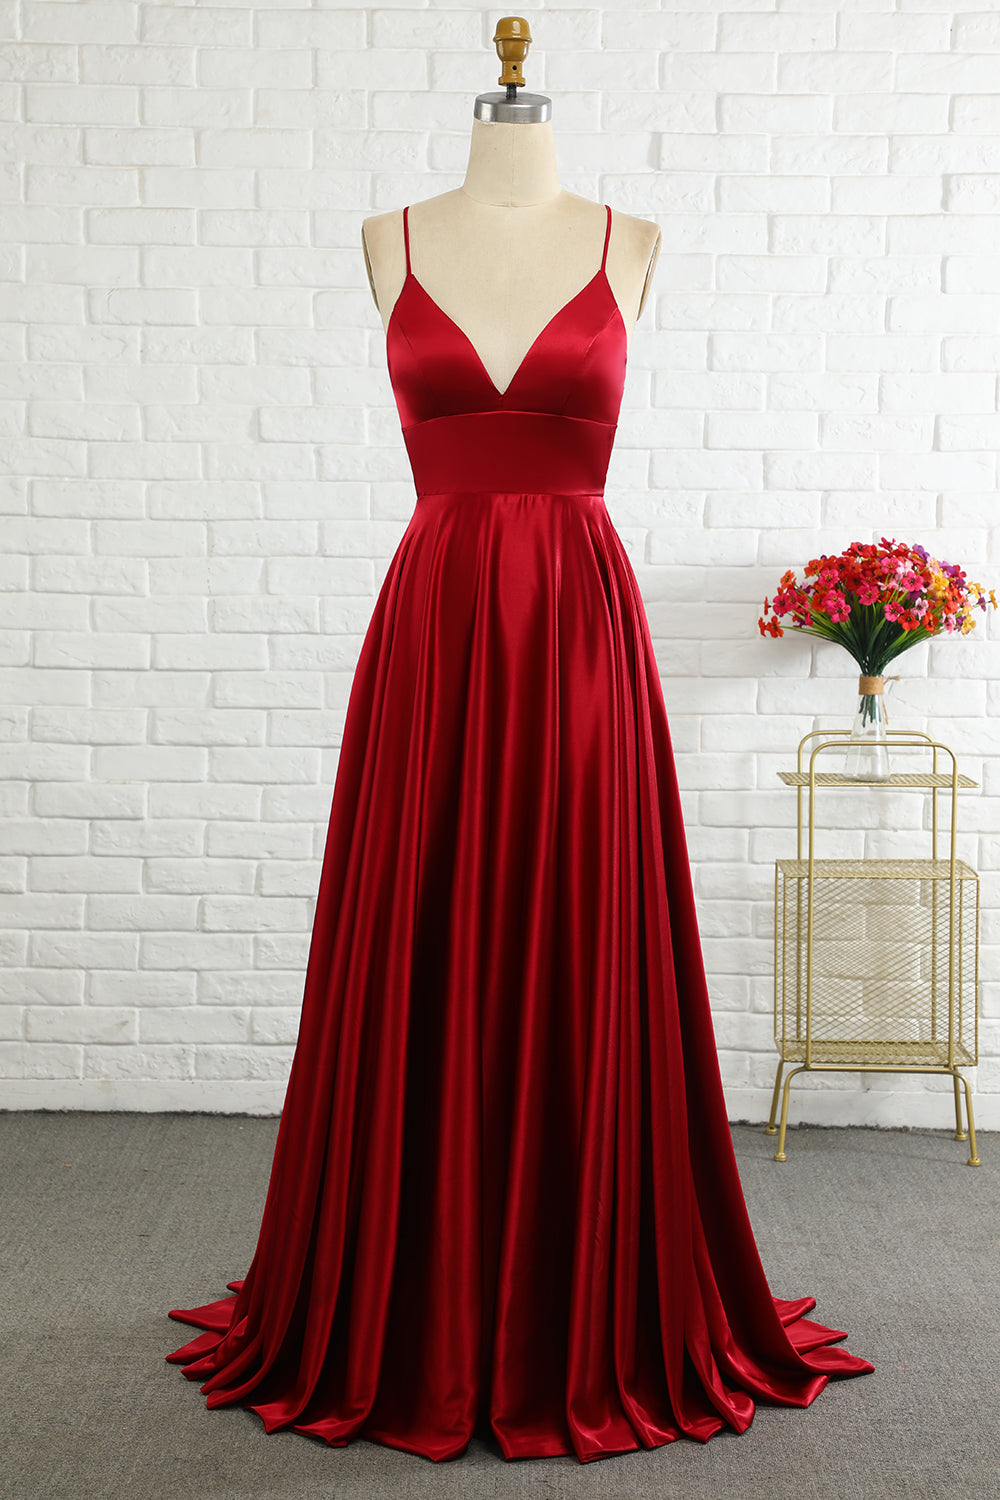 Simple A Line Spaghetti Straps Burgundy Long Formal Dress with Cirss Cross Back